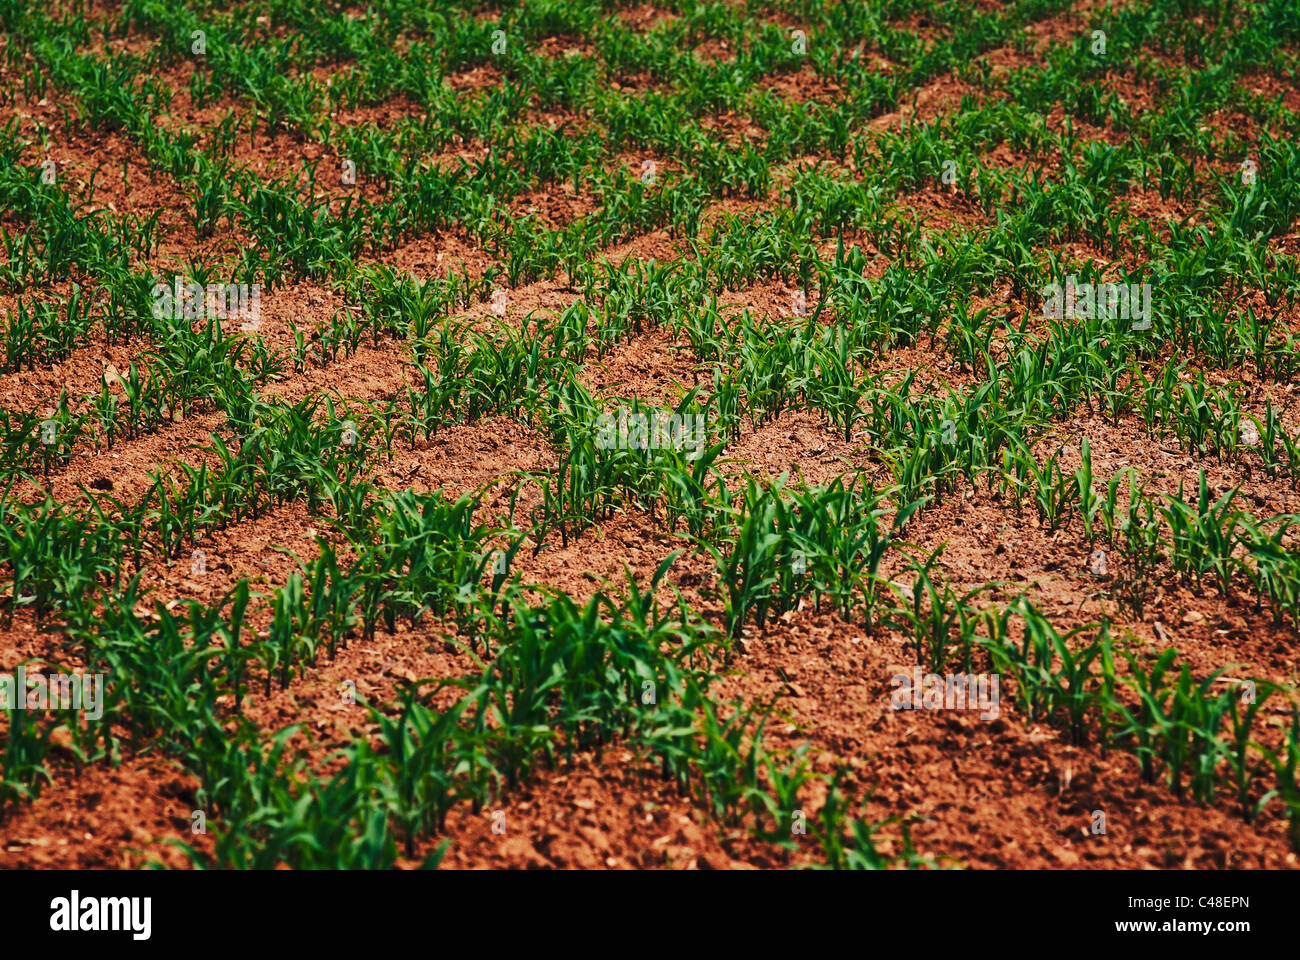 young corn seedling rows overlap forming a checkerboard pattern Stock Photo